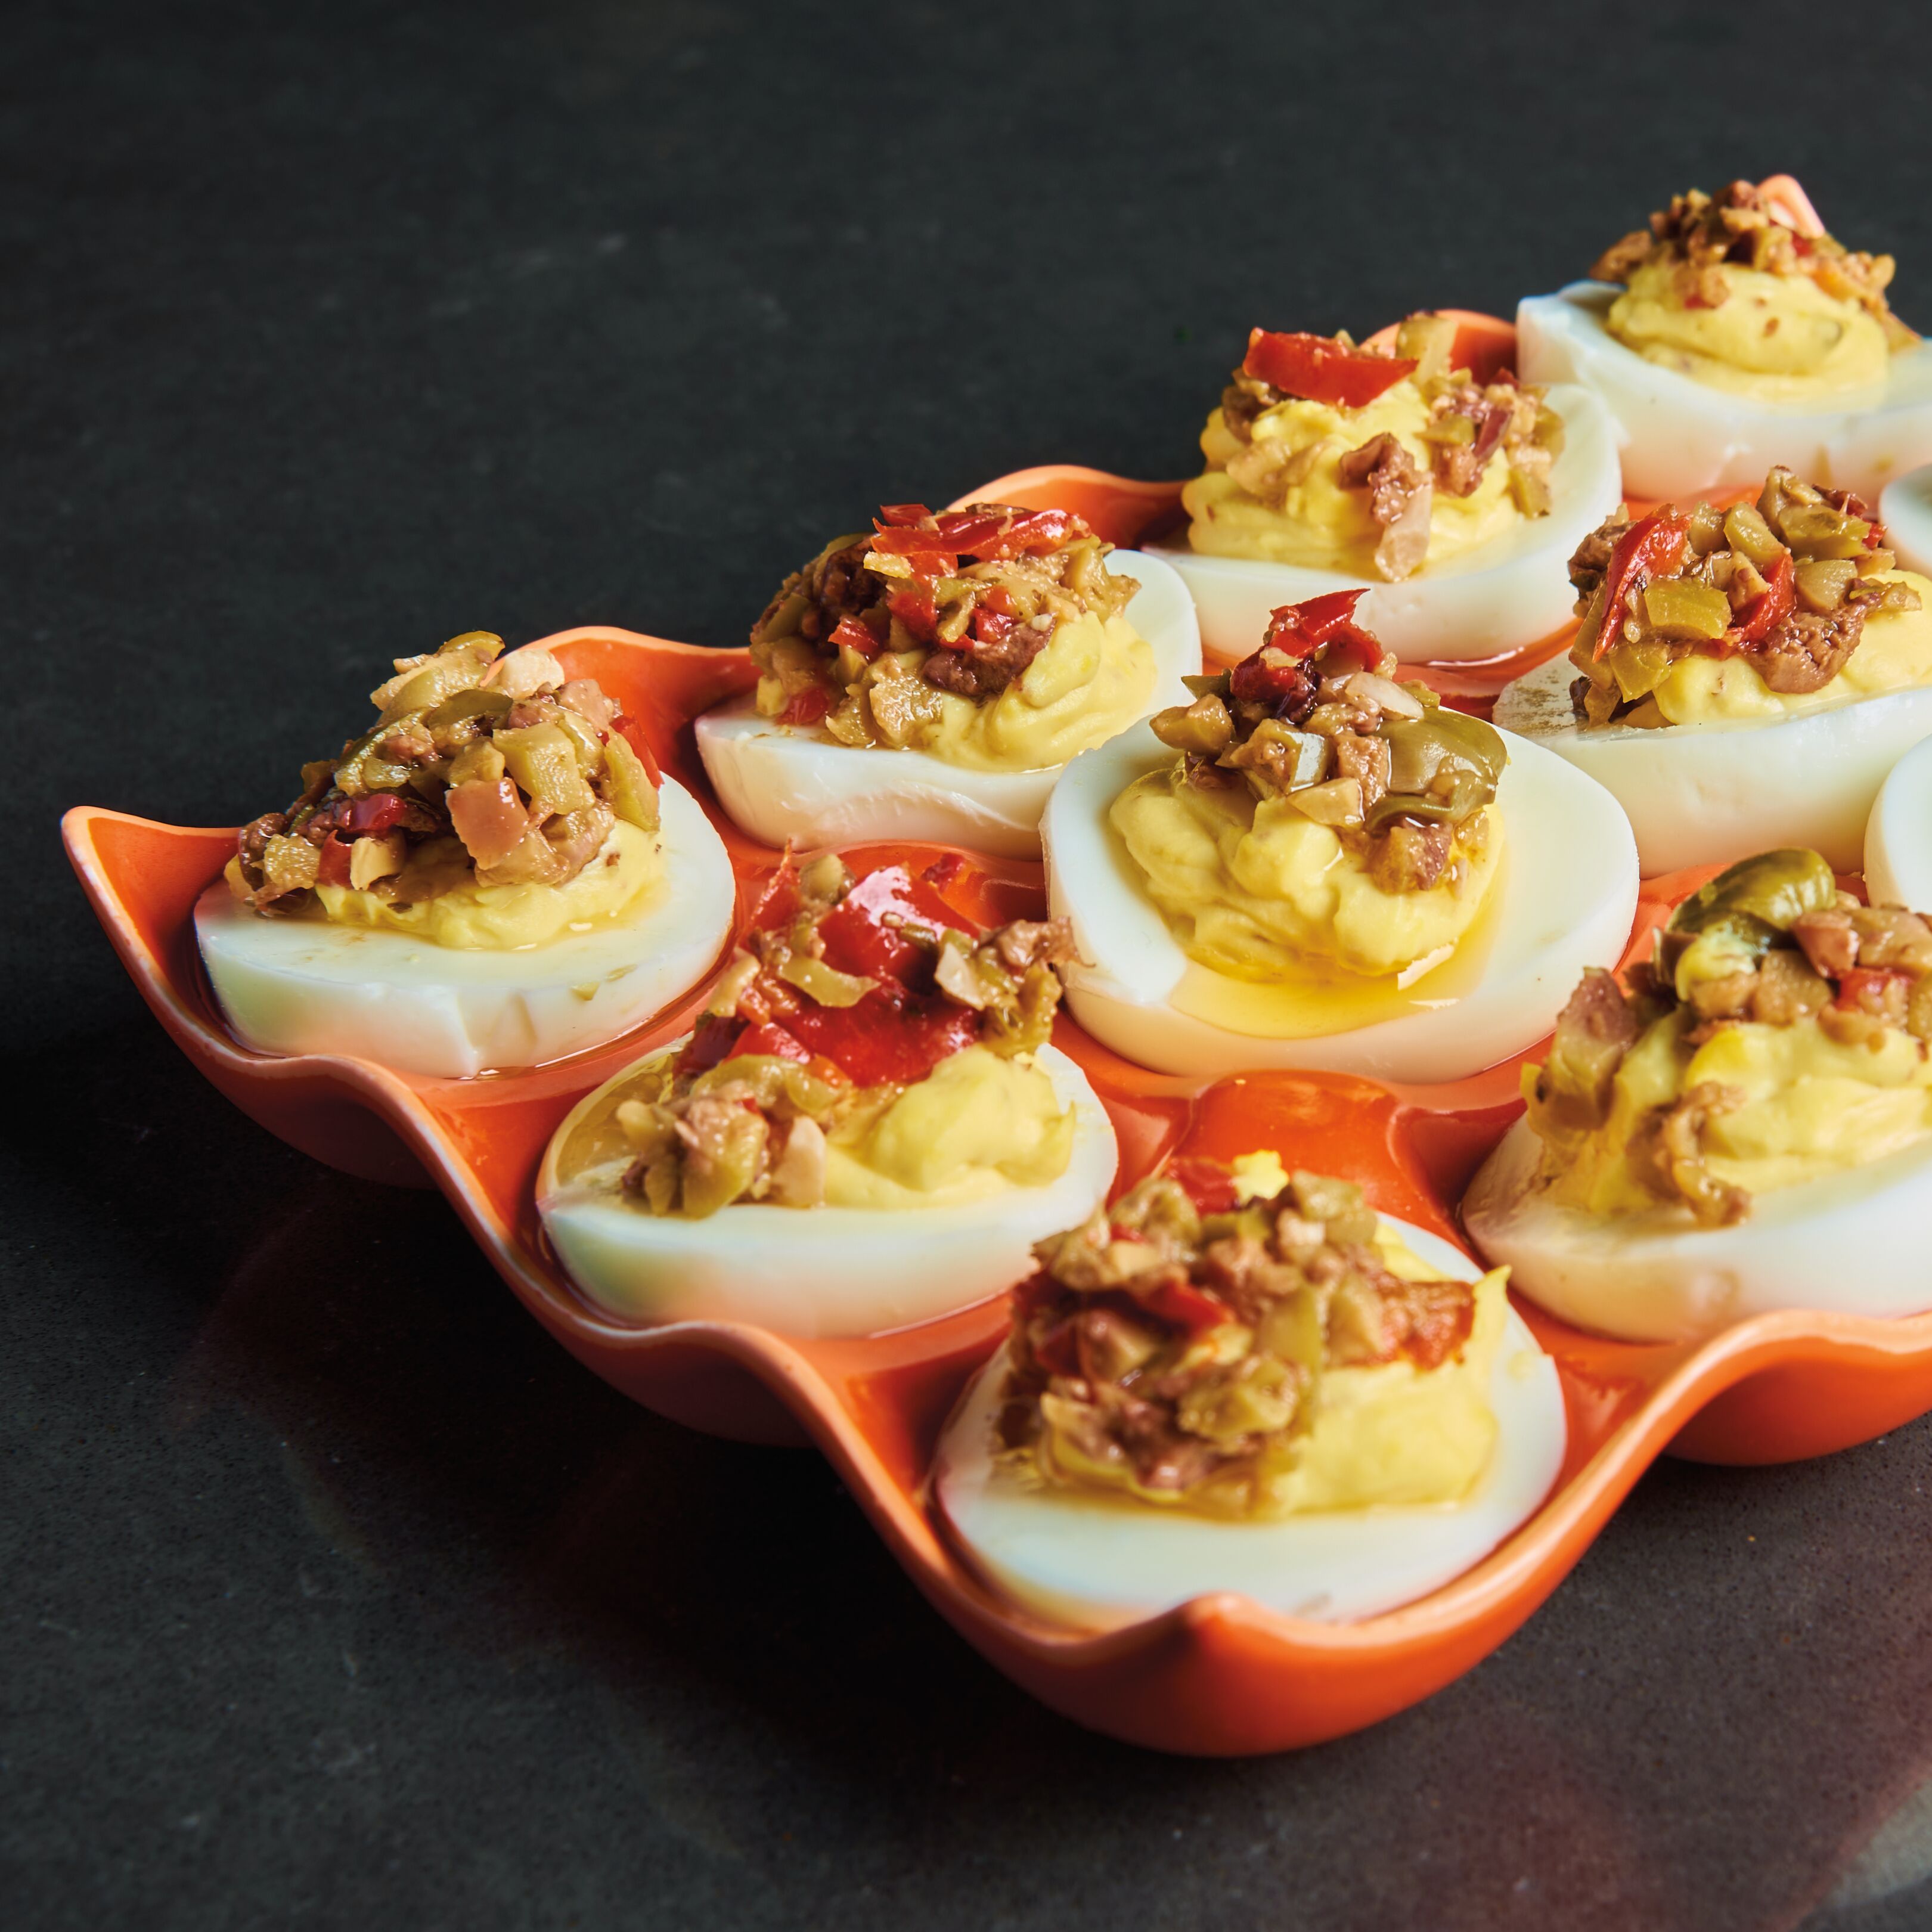 Deviled eggs stuffed with chopped olive tapenade on an orange dish